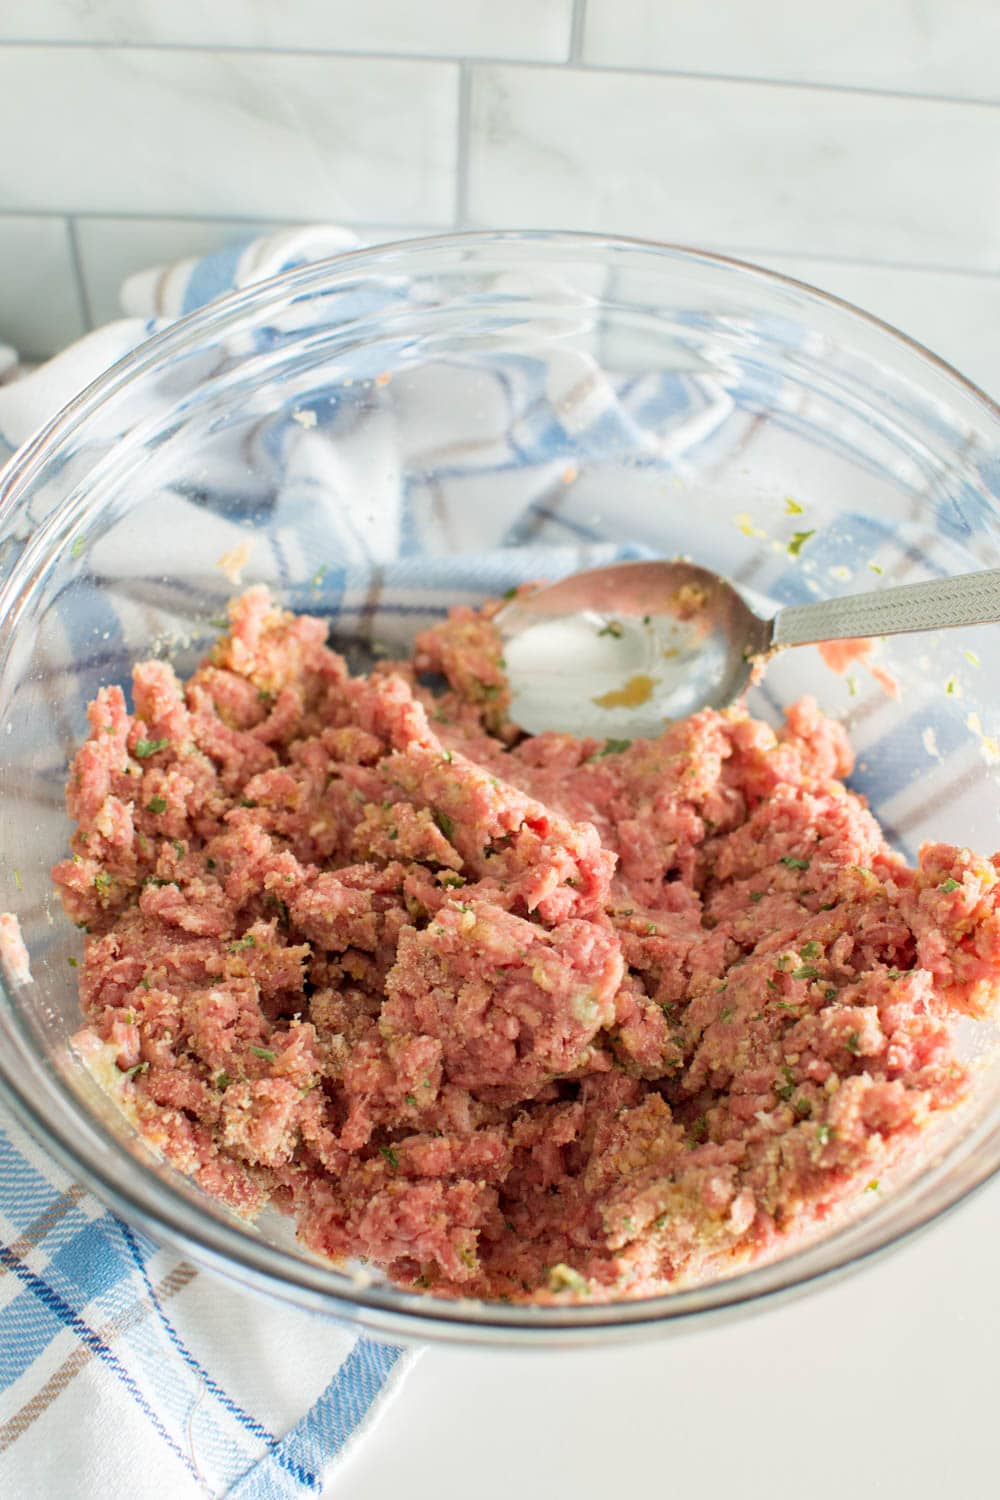 Mixing ground beef and additional ingredients to make meat balls